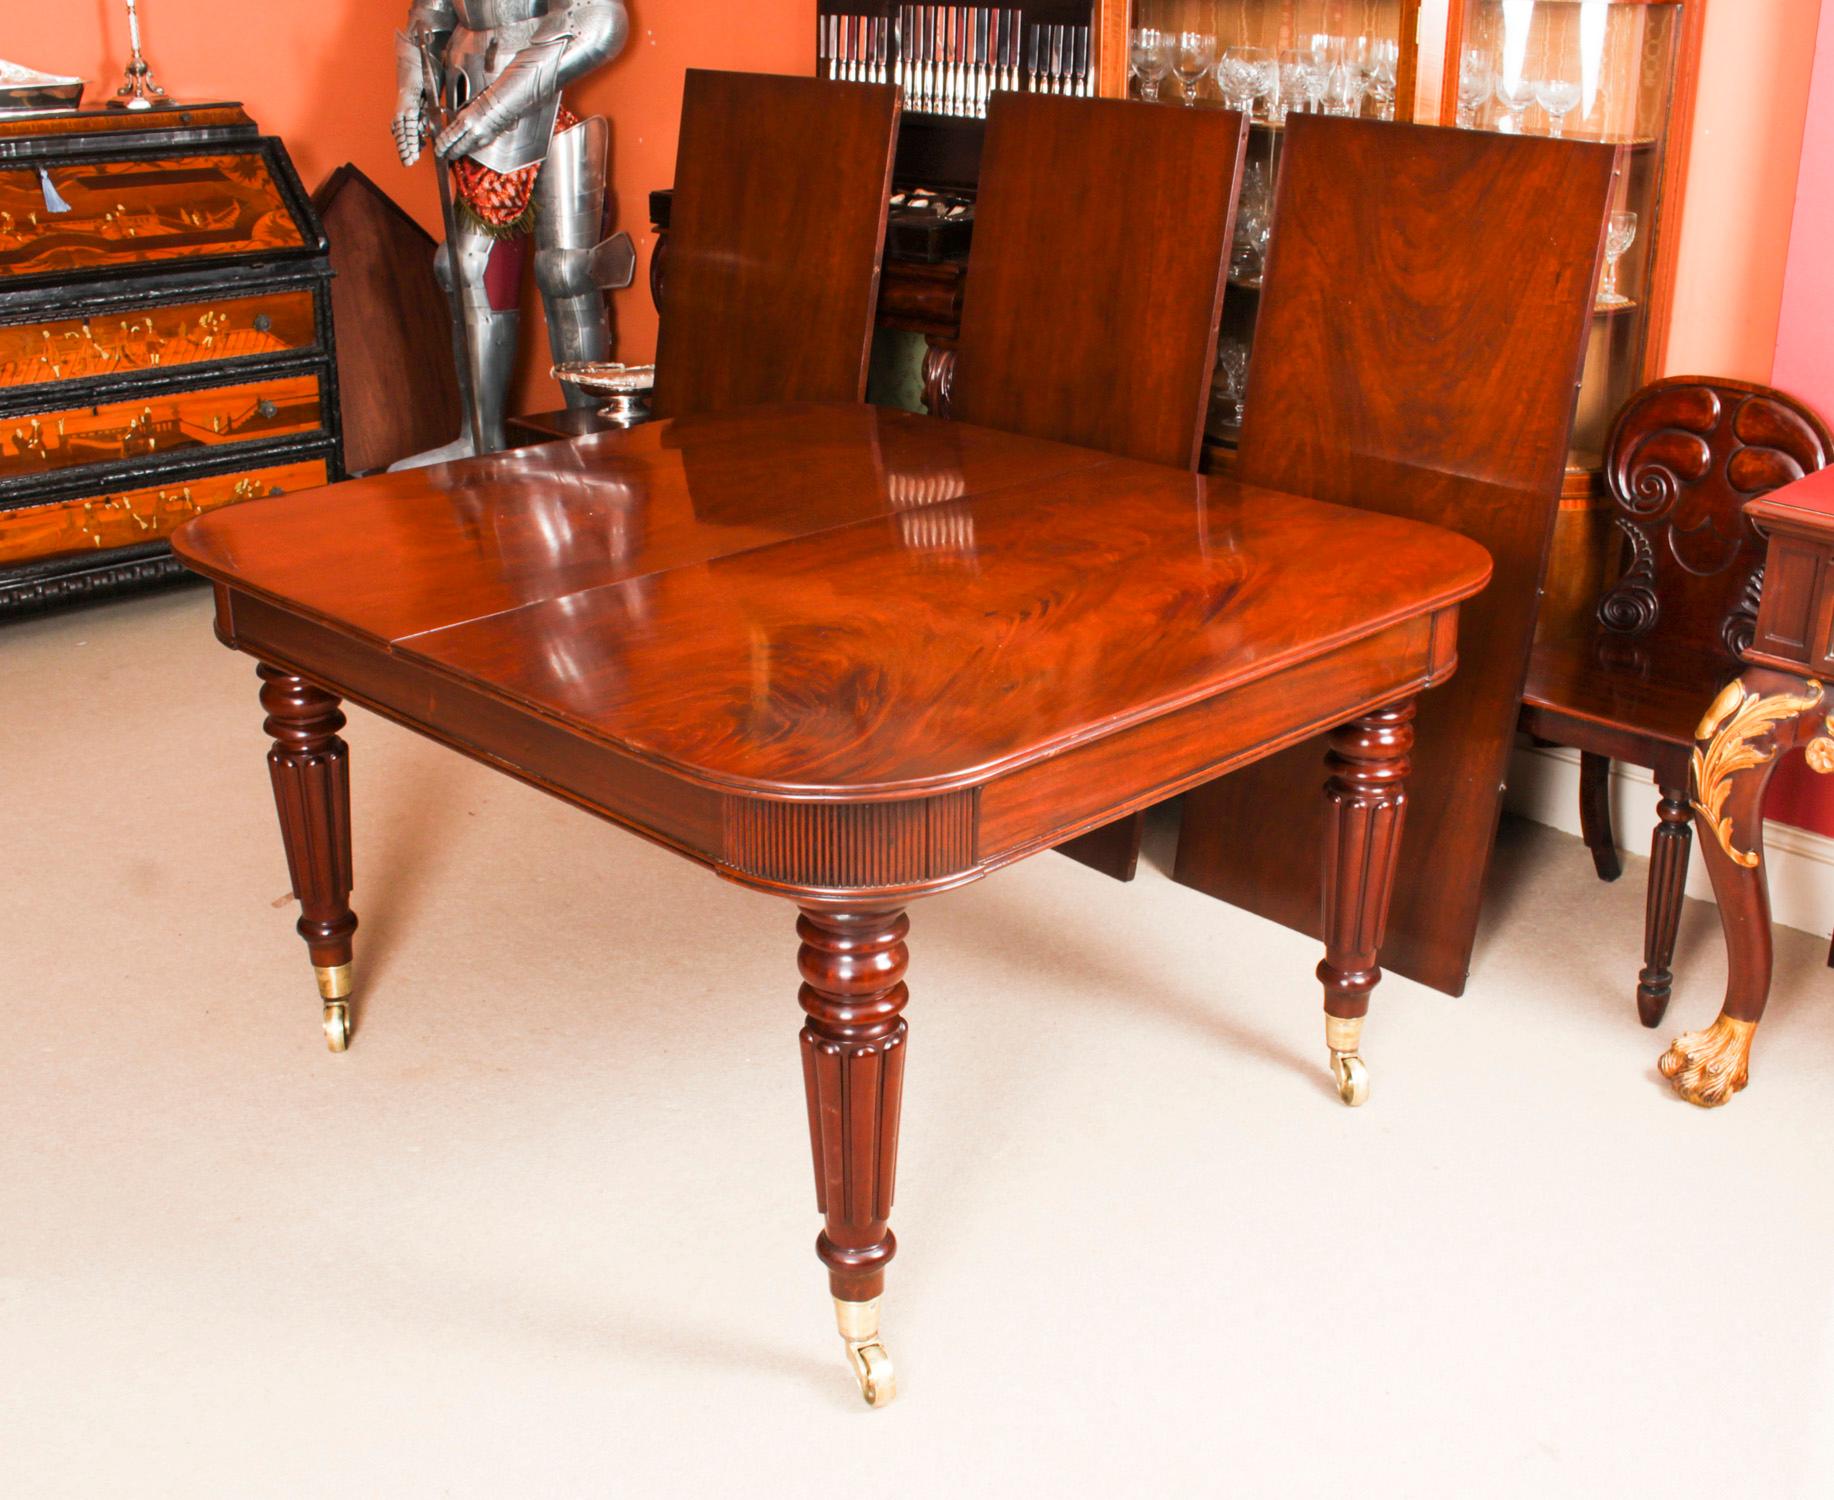 Antique Regency Flame Mahogany Dining Table & 12 chairs 19th C 1